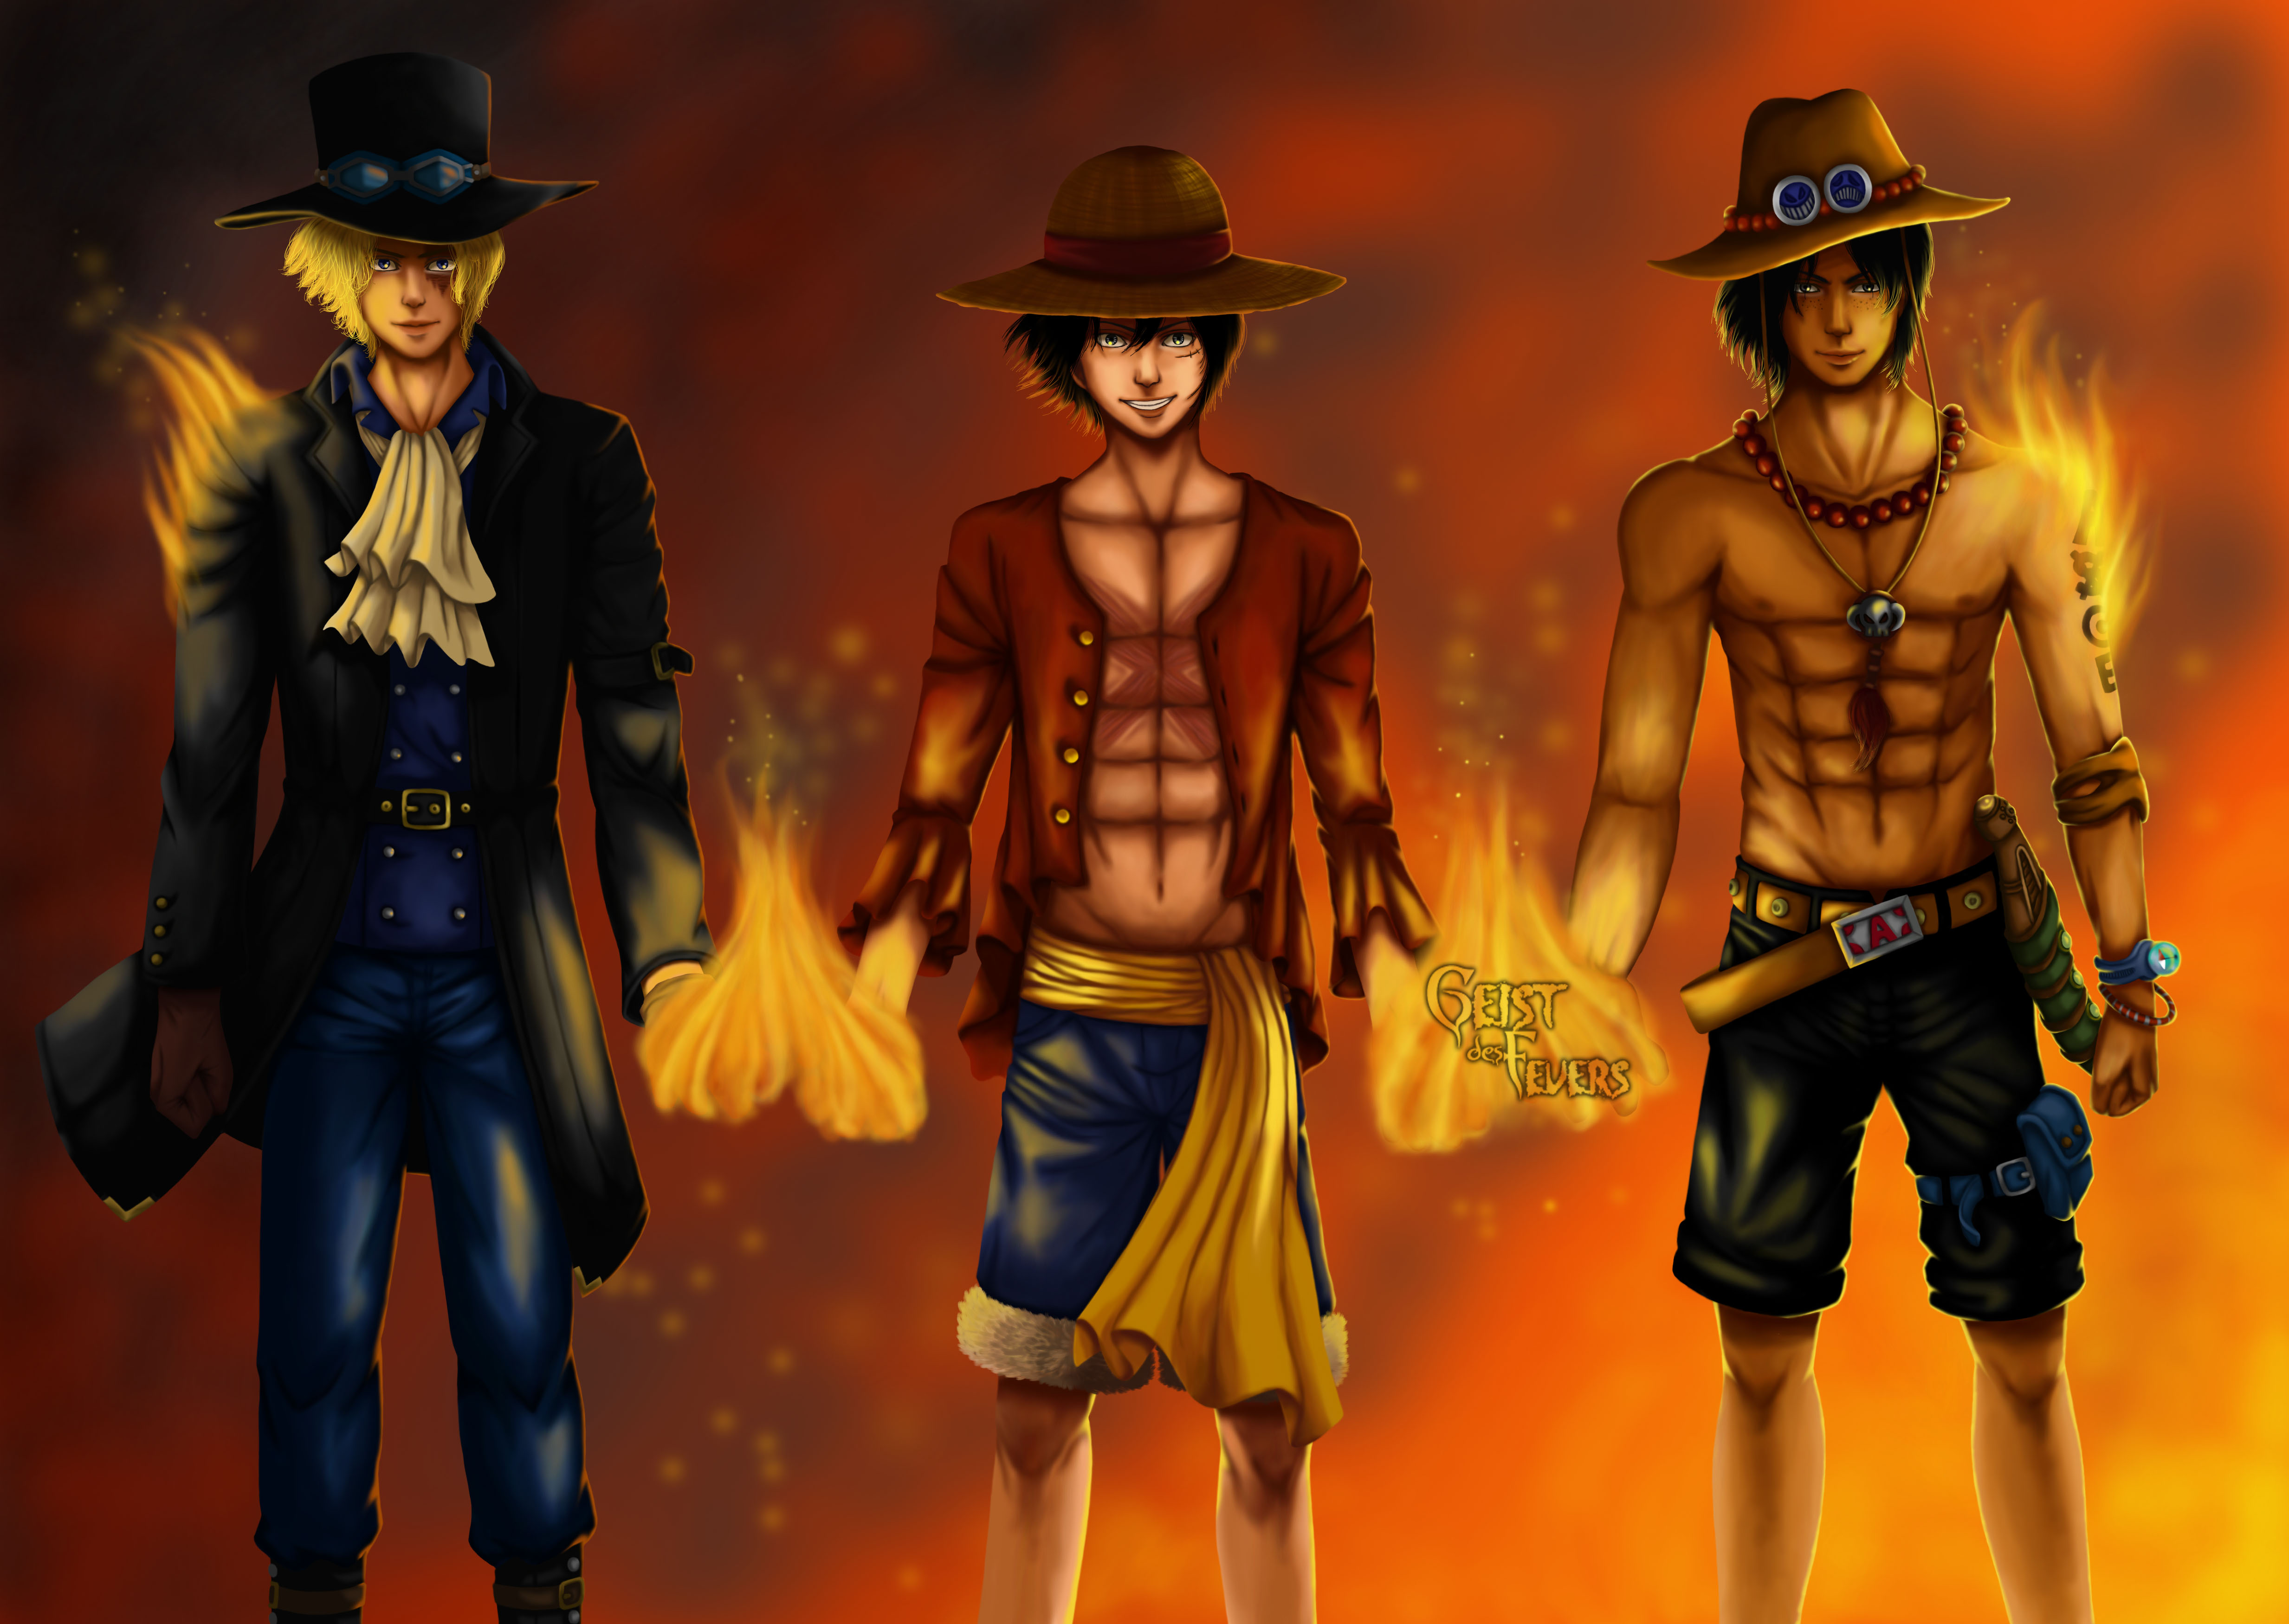 2500x1363  2500x1363 Portgas D Ace Monkey D Luffy Sabo One Piece  wallpaper  Coolwallpapersme